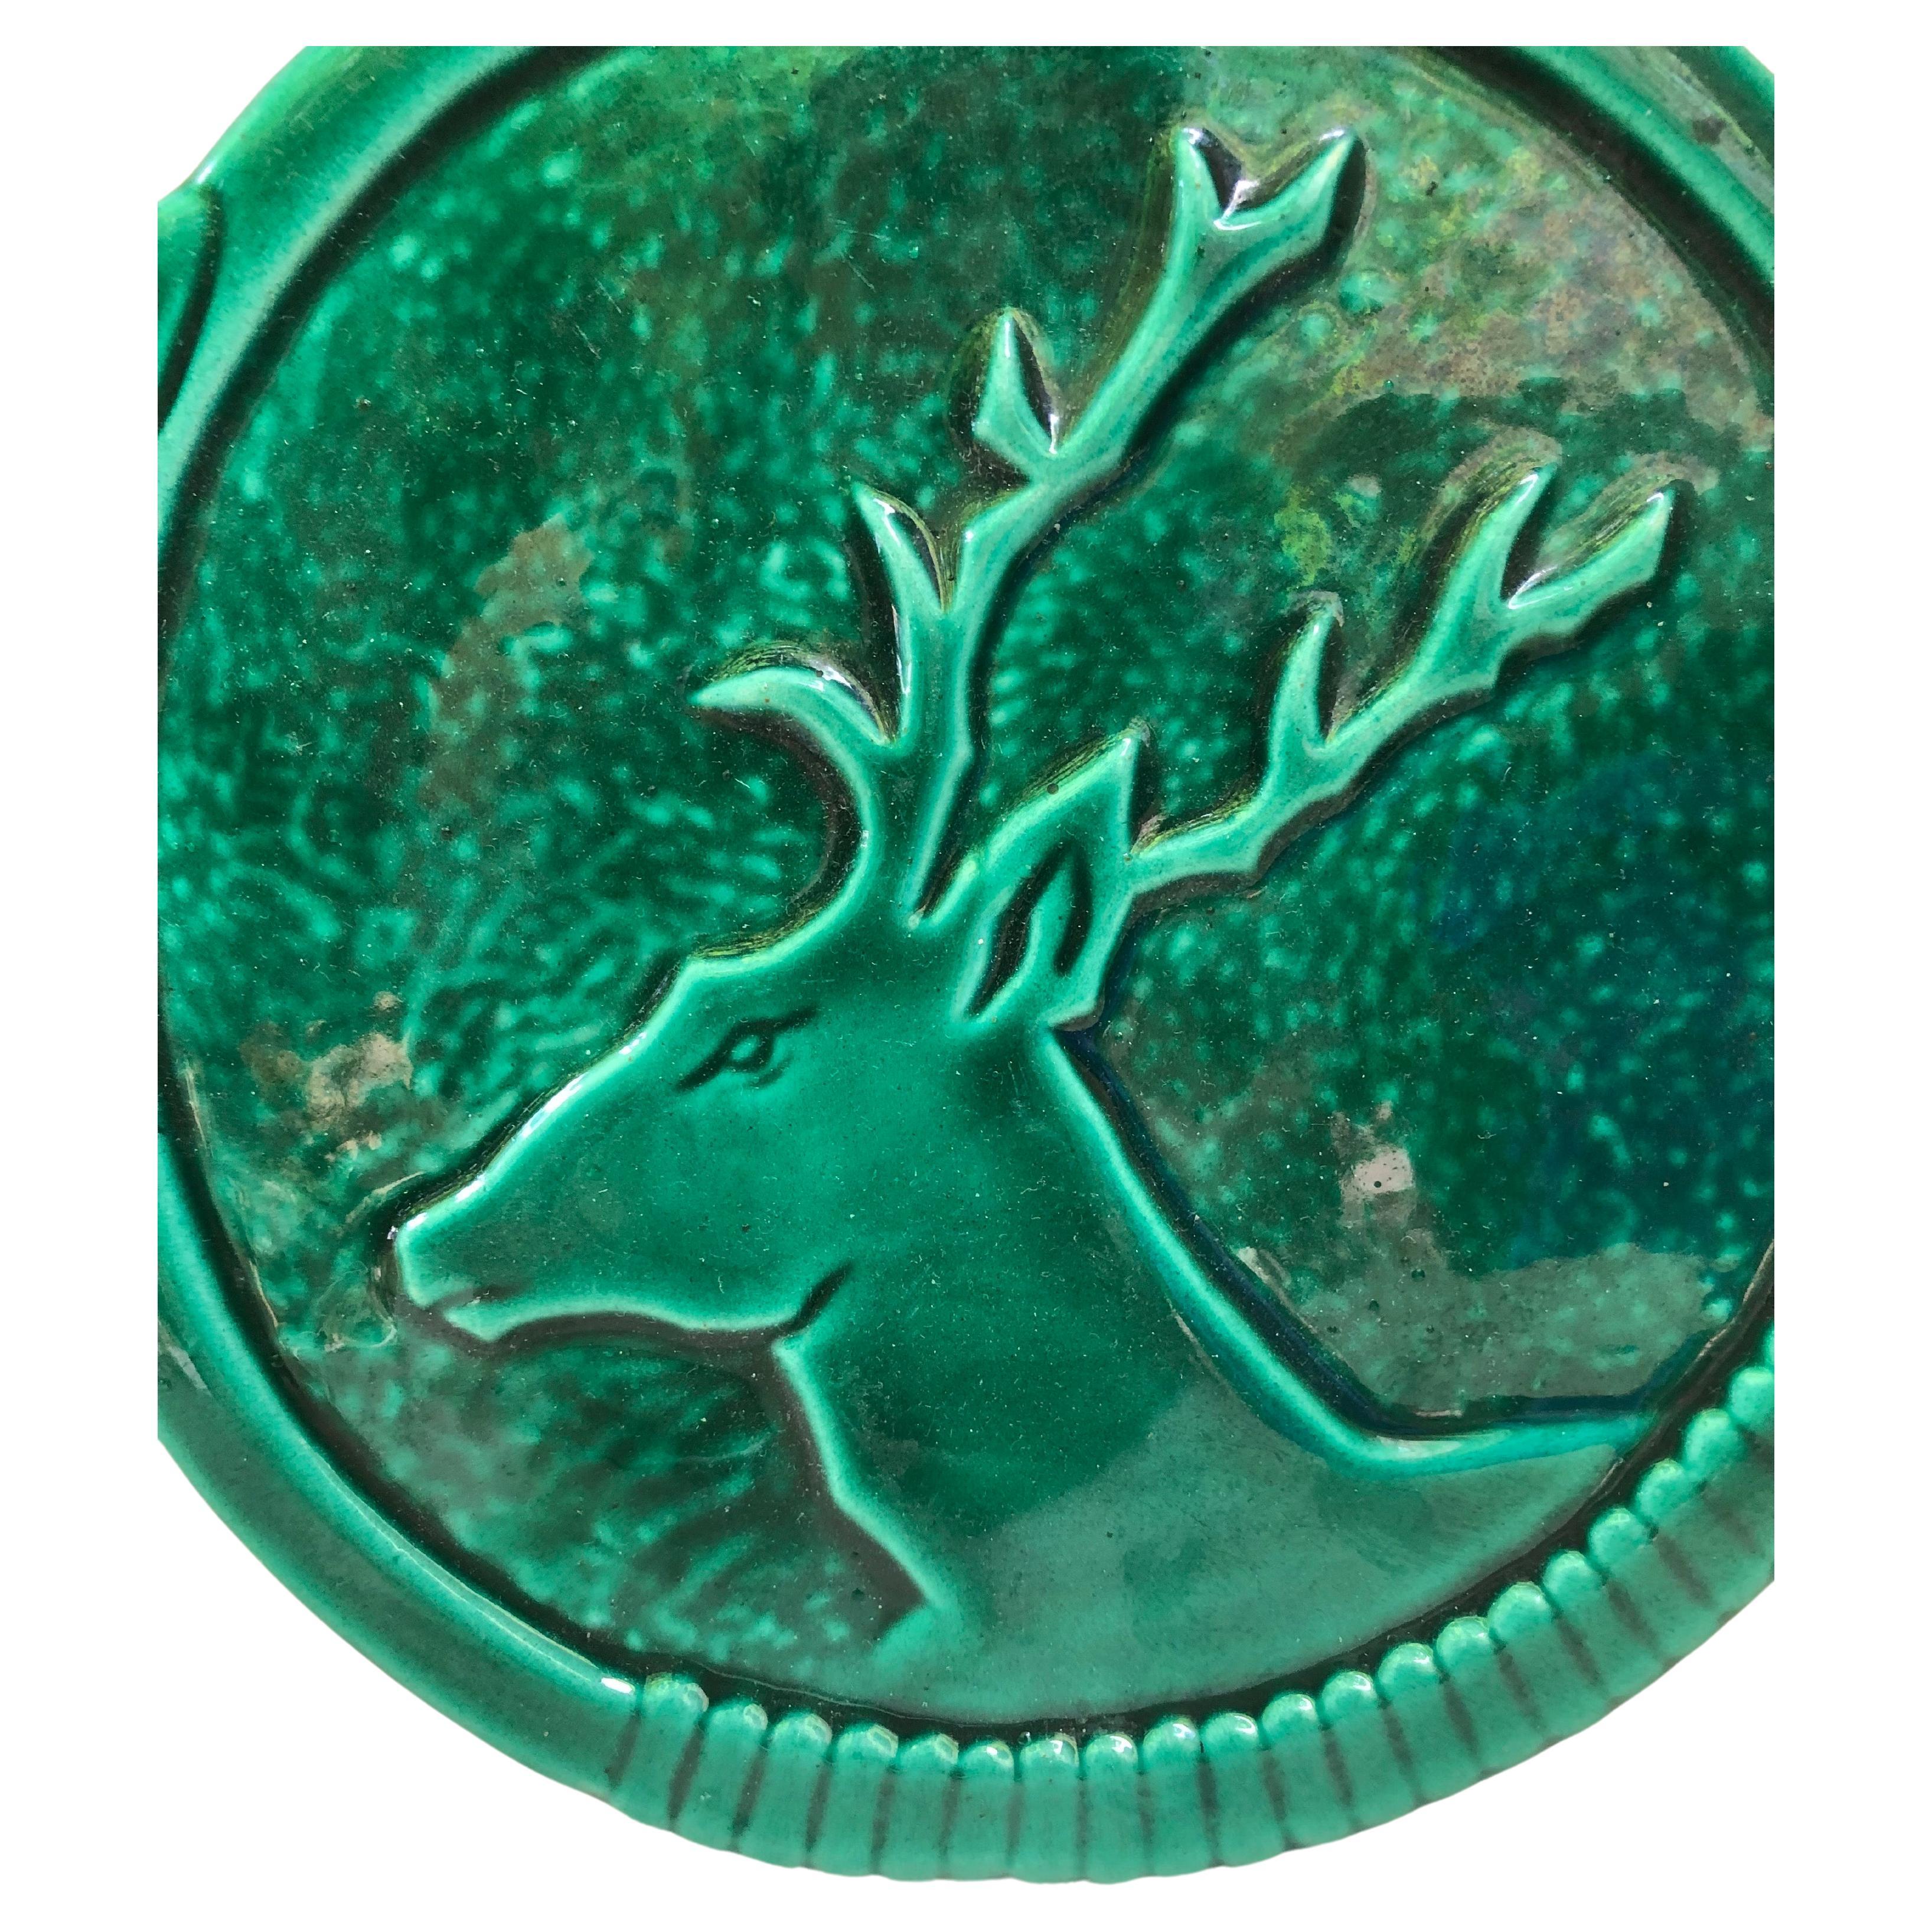 Mid-century French Green Majolica deer Trivet Vallauris.
Shaped as an hunting horn.